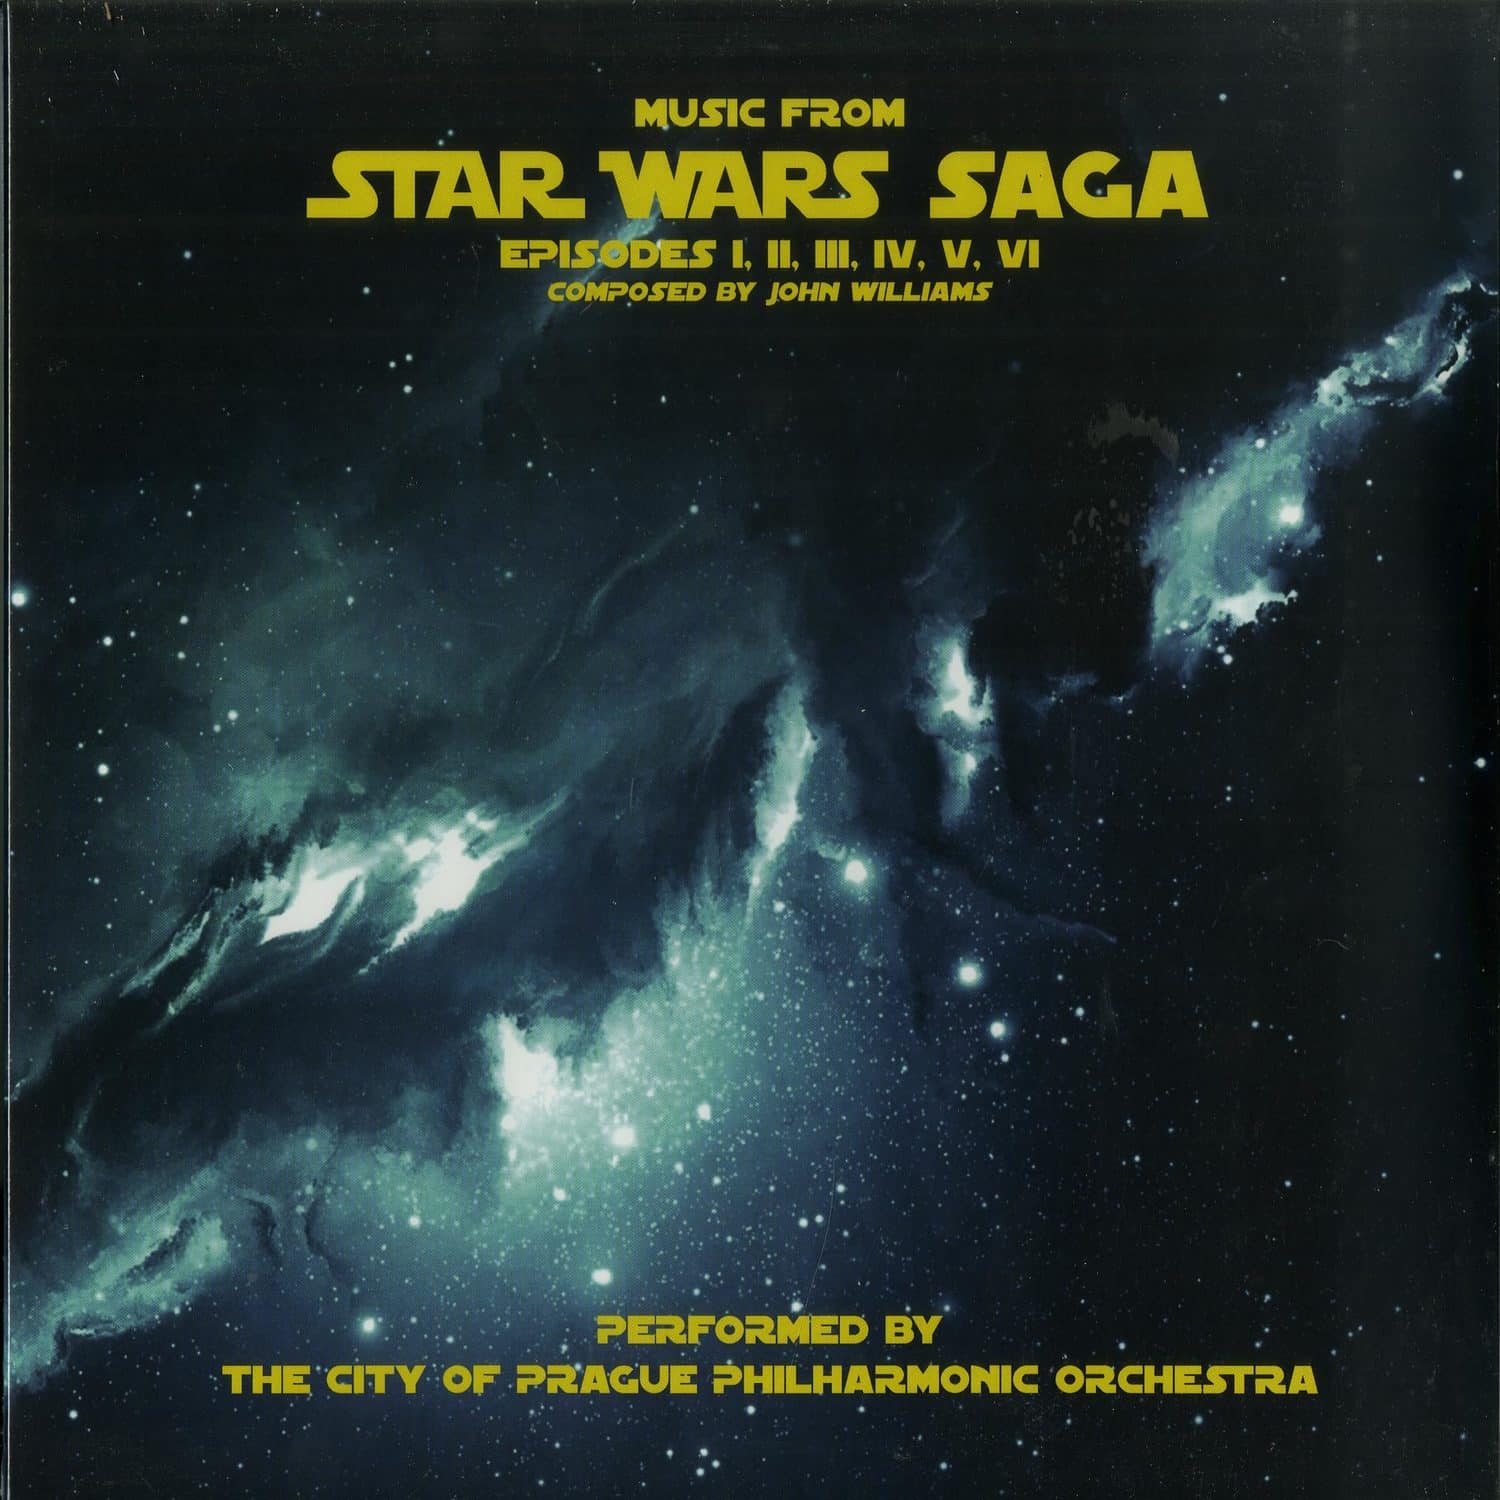 The City Of Prague Philharmonic Orchestra - MUSIC FROM STAR WARS SAGA 